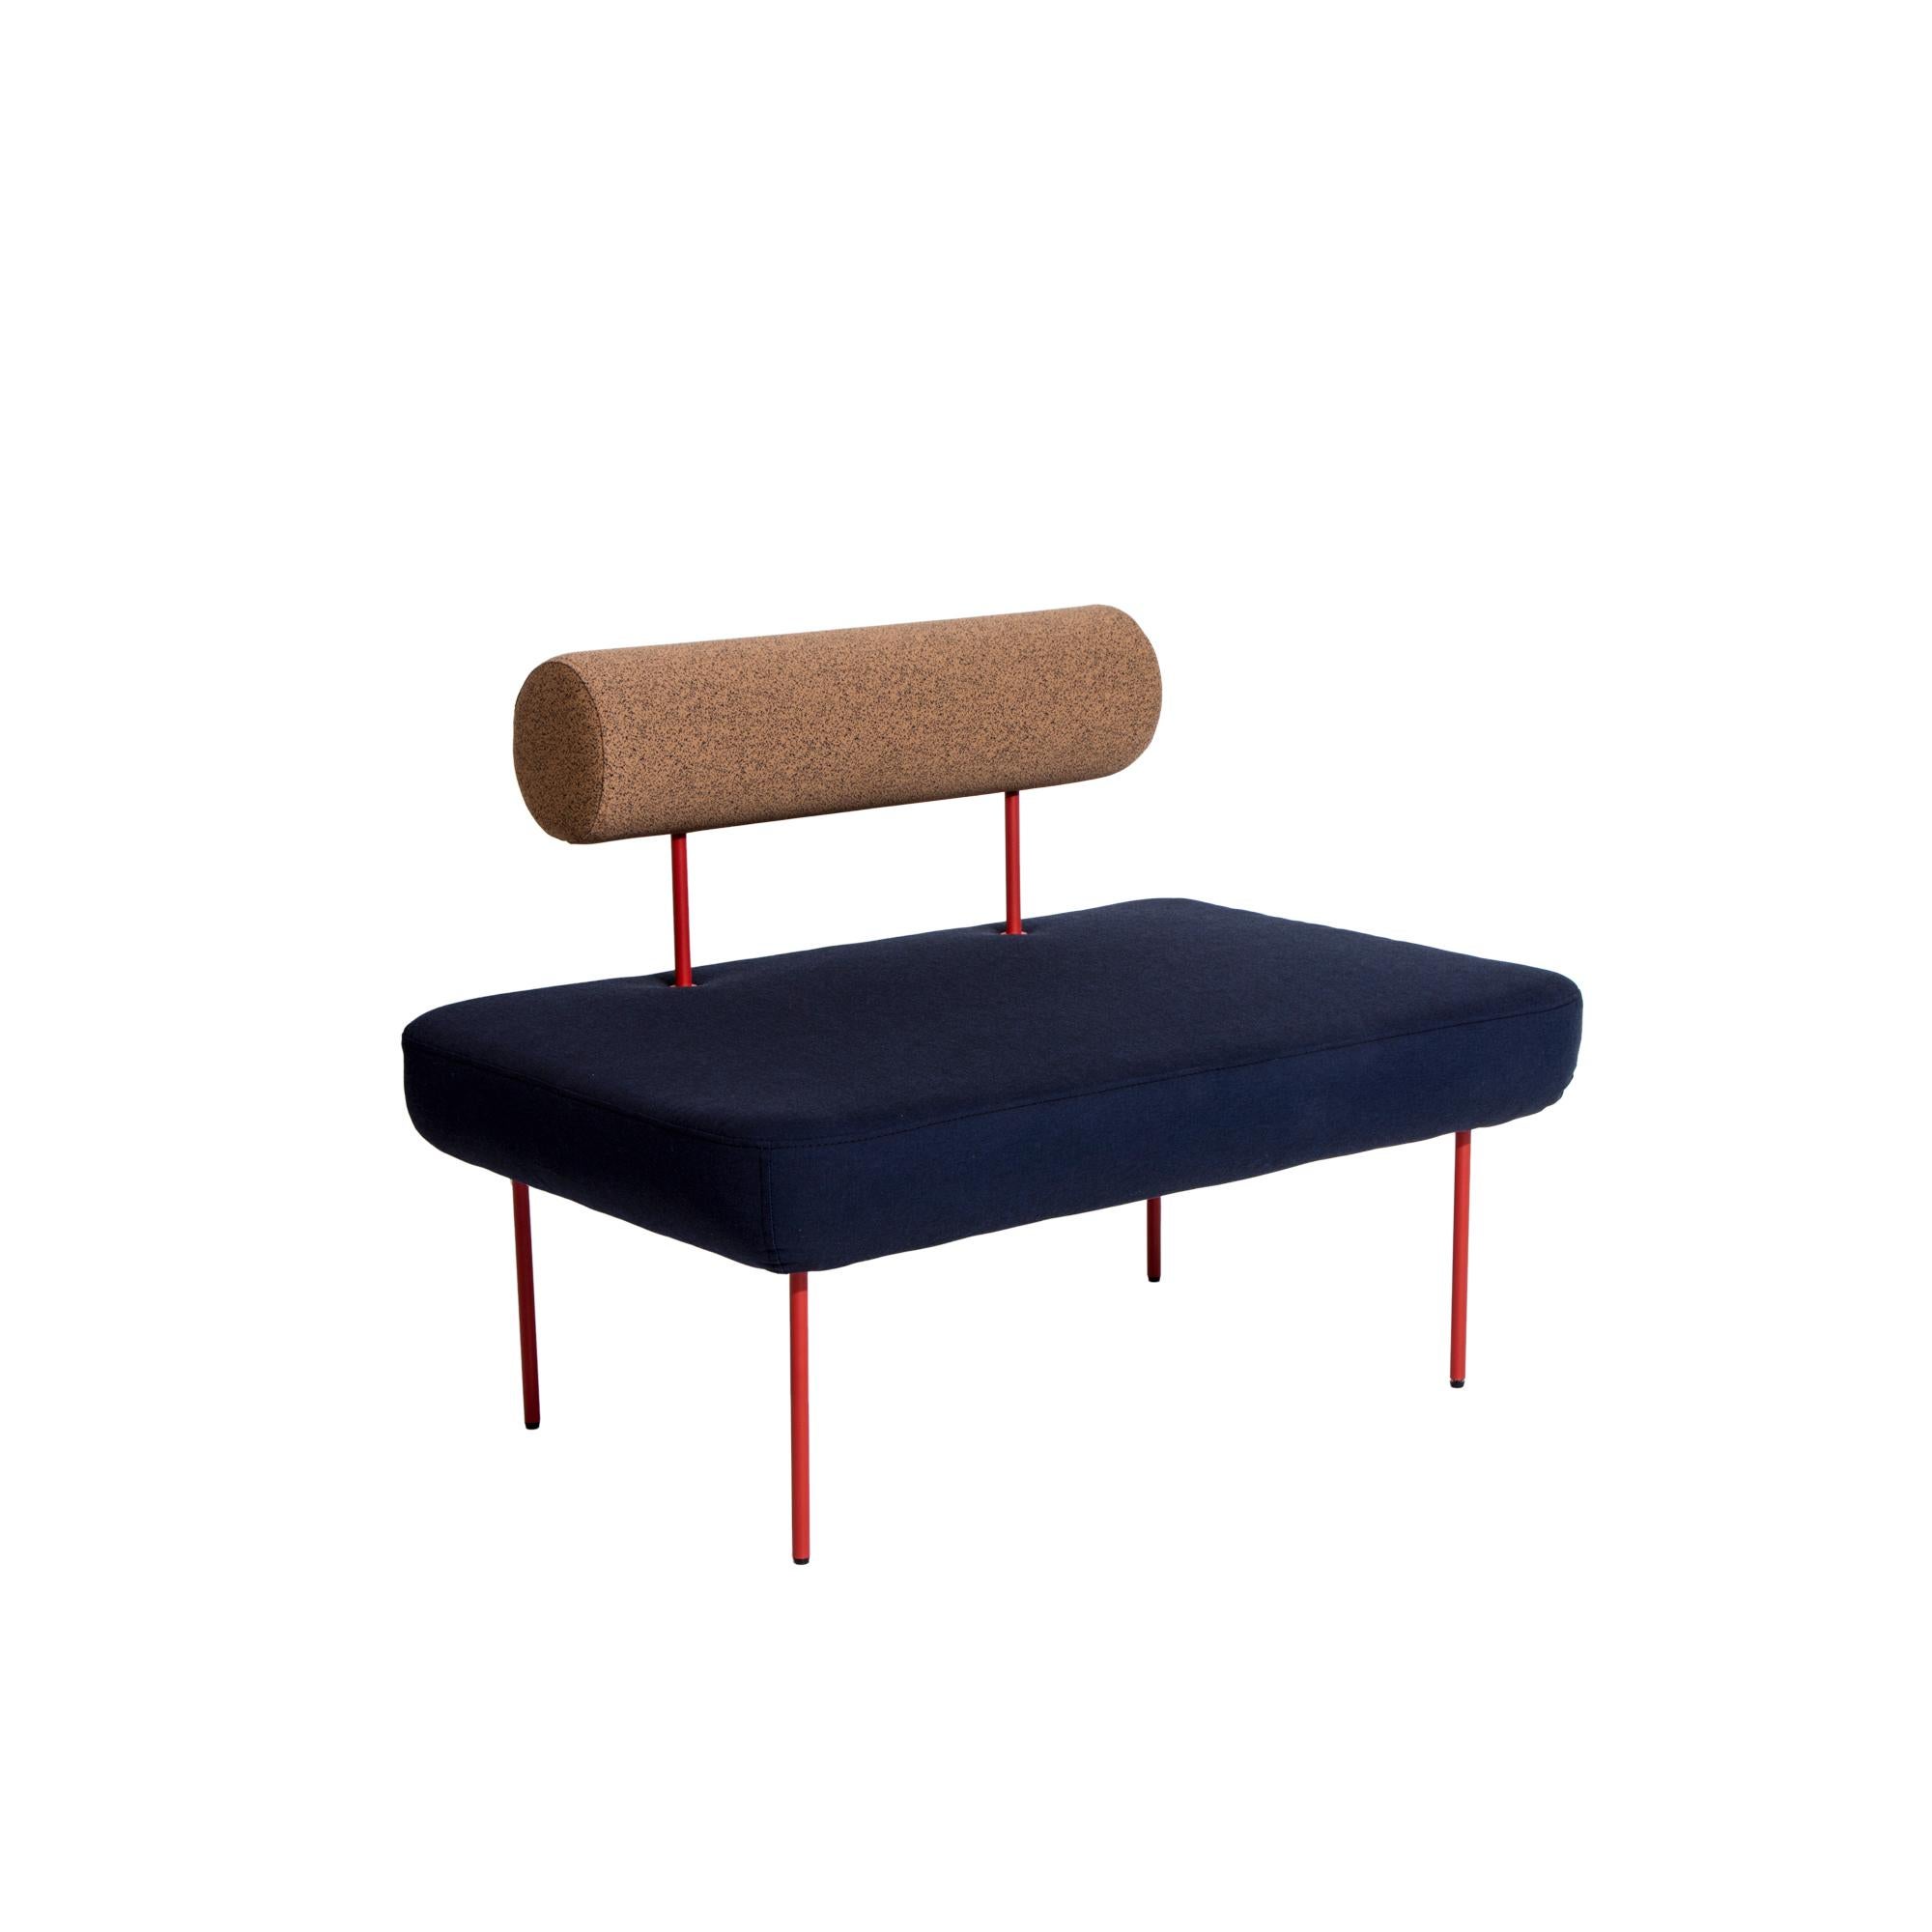 Petite Friture Large Hoff Armchair in Blue and Brown by Morten & Jonas, 2015

Hoff created by designer duo Morten & Jonas is a collection of two modular stools and two modular armchairs. they can combine to make a sofa as well an entire living